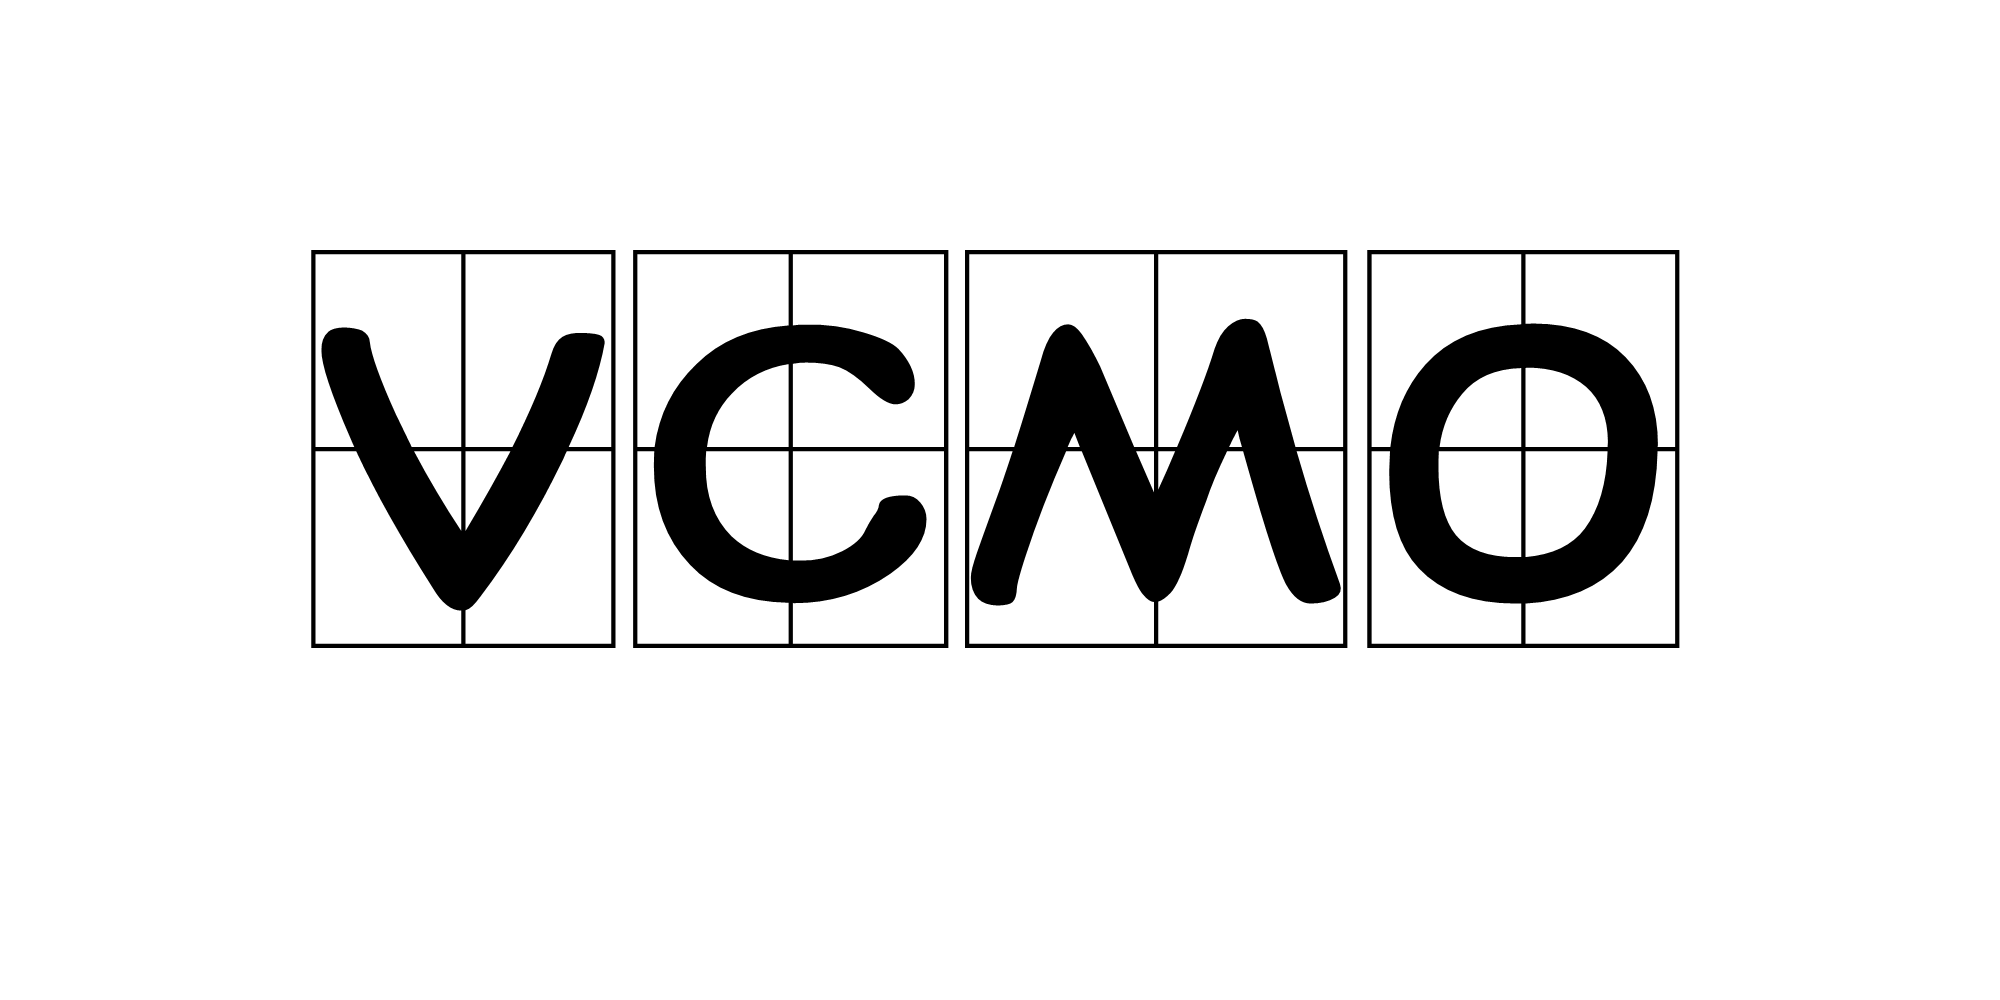 VCMO